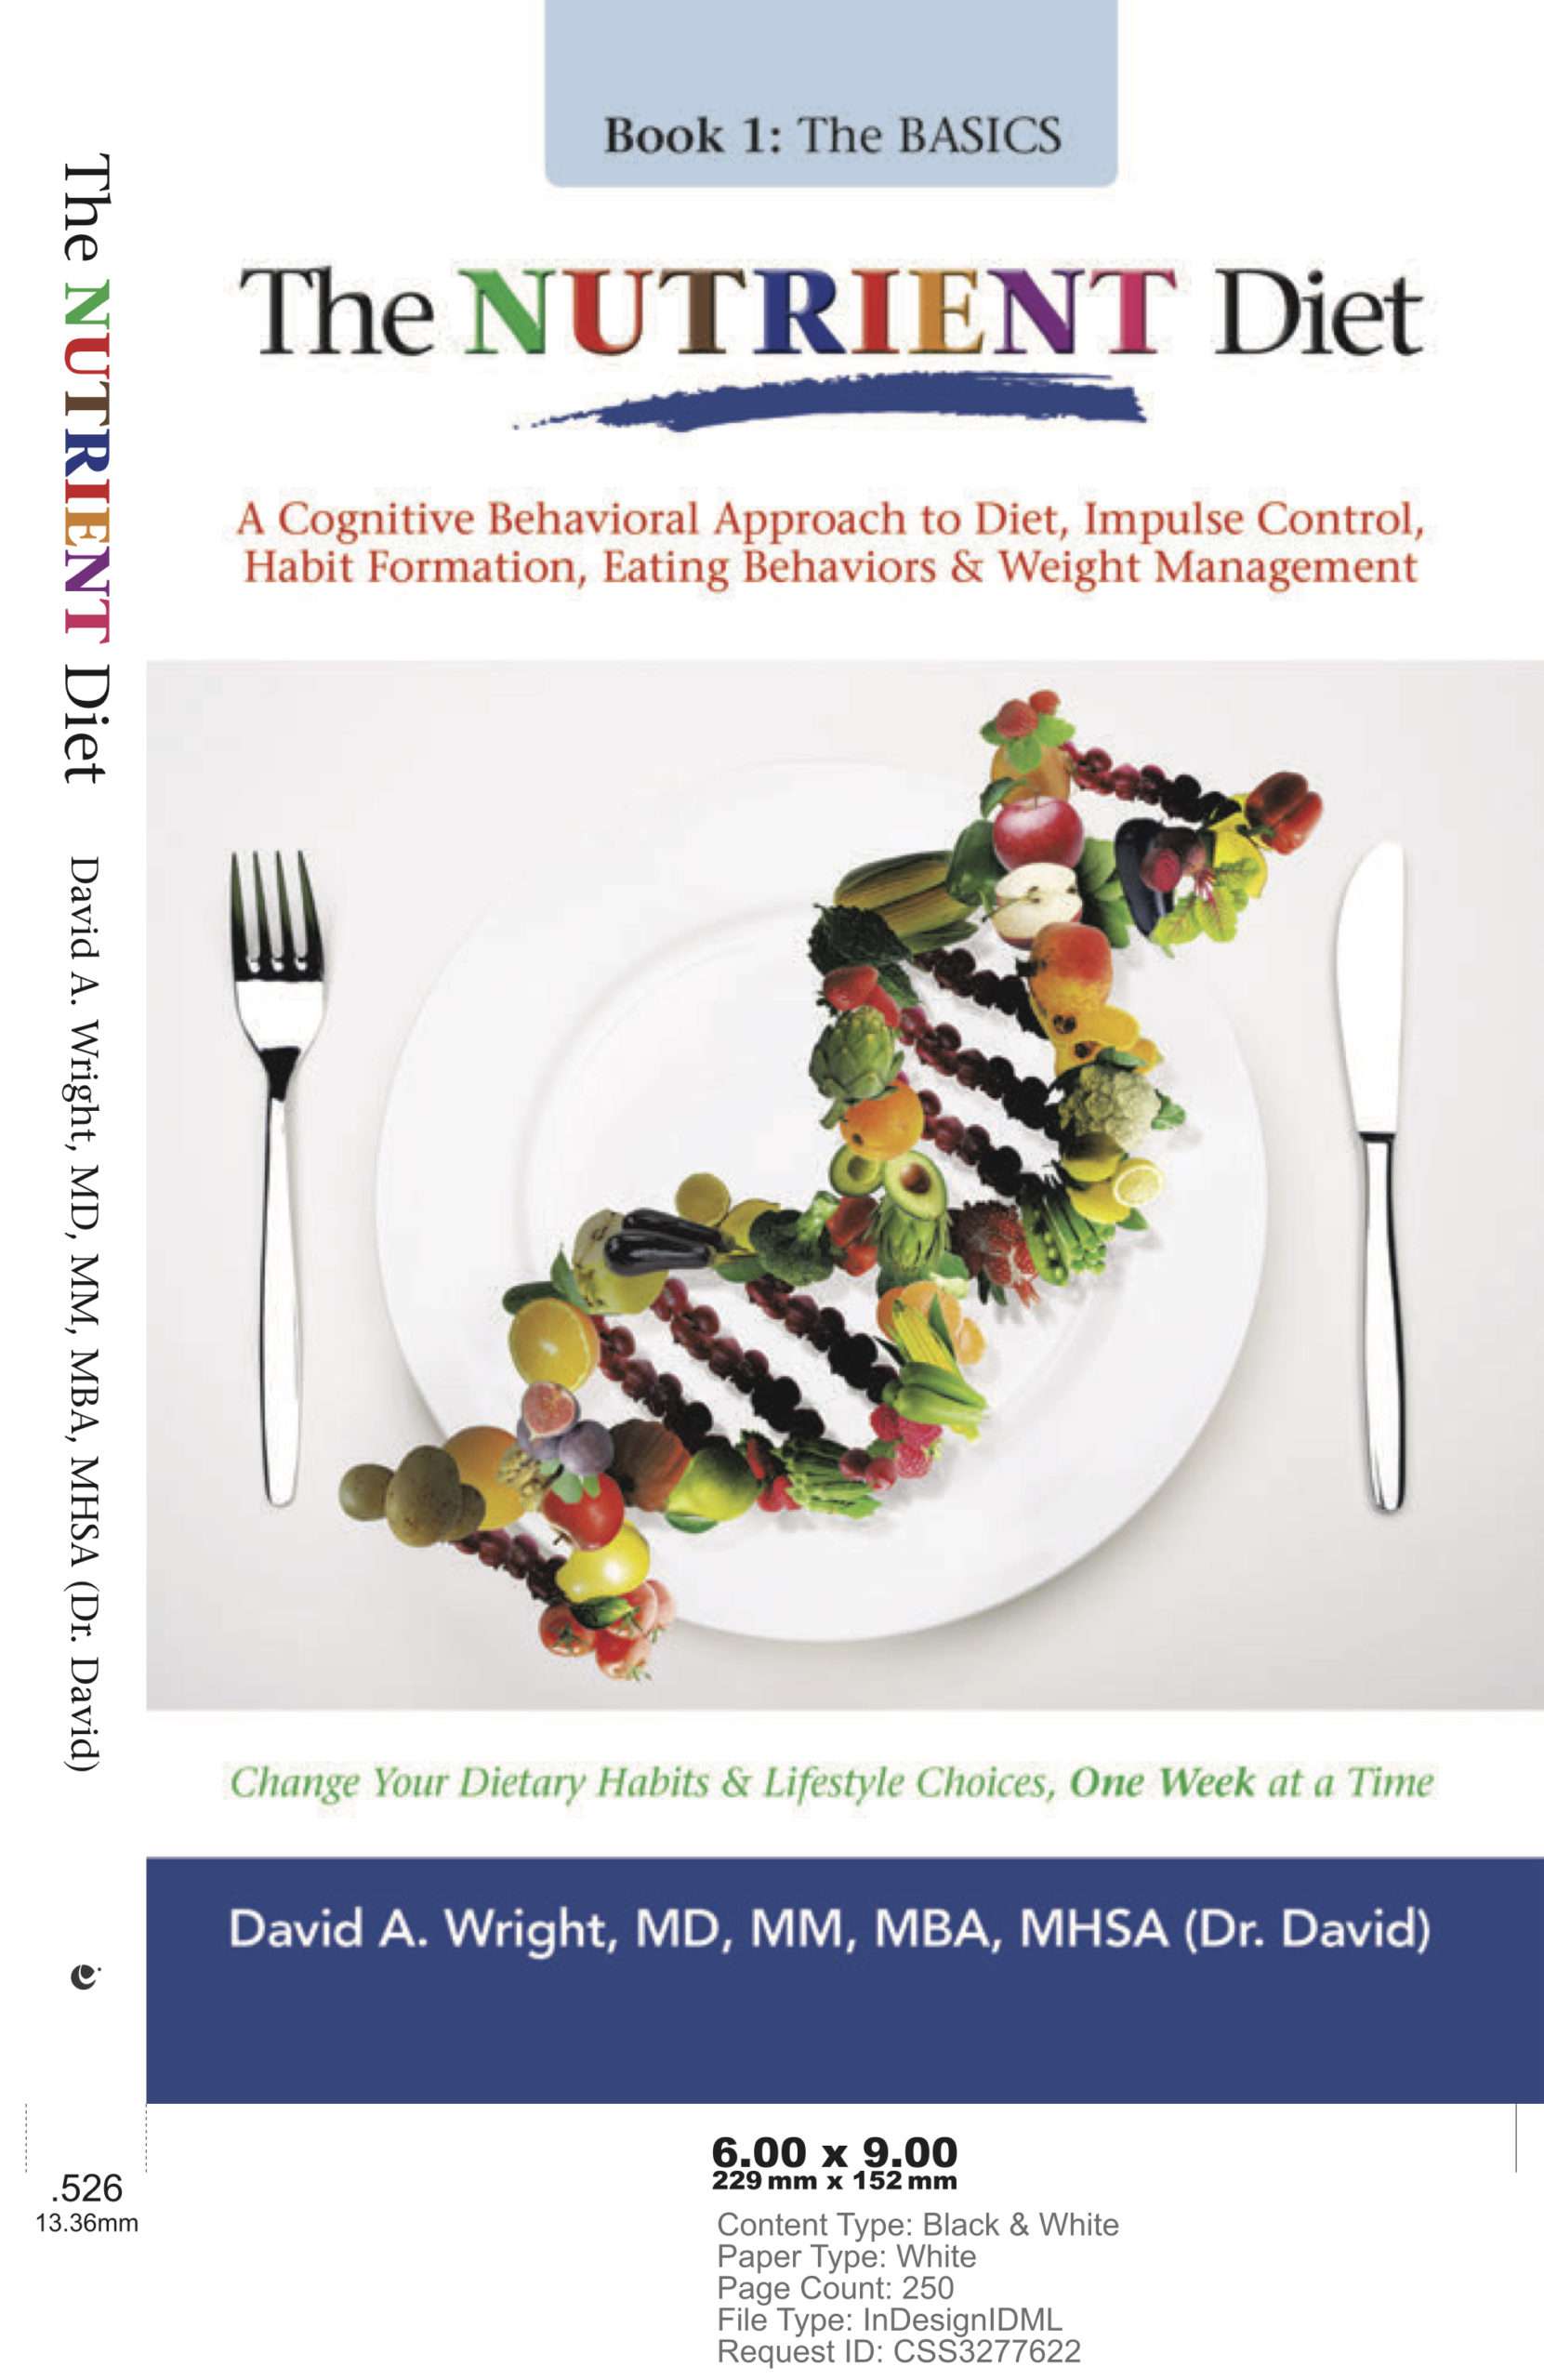 the nutrient diet frontcover 05182021(1)